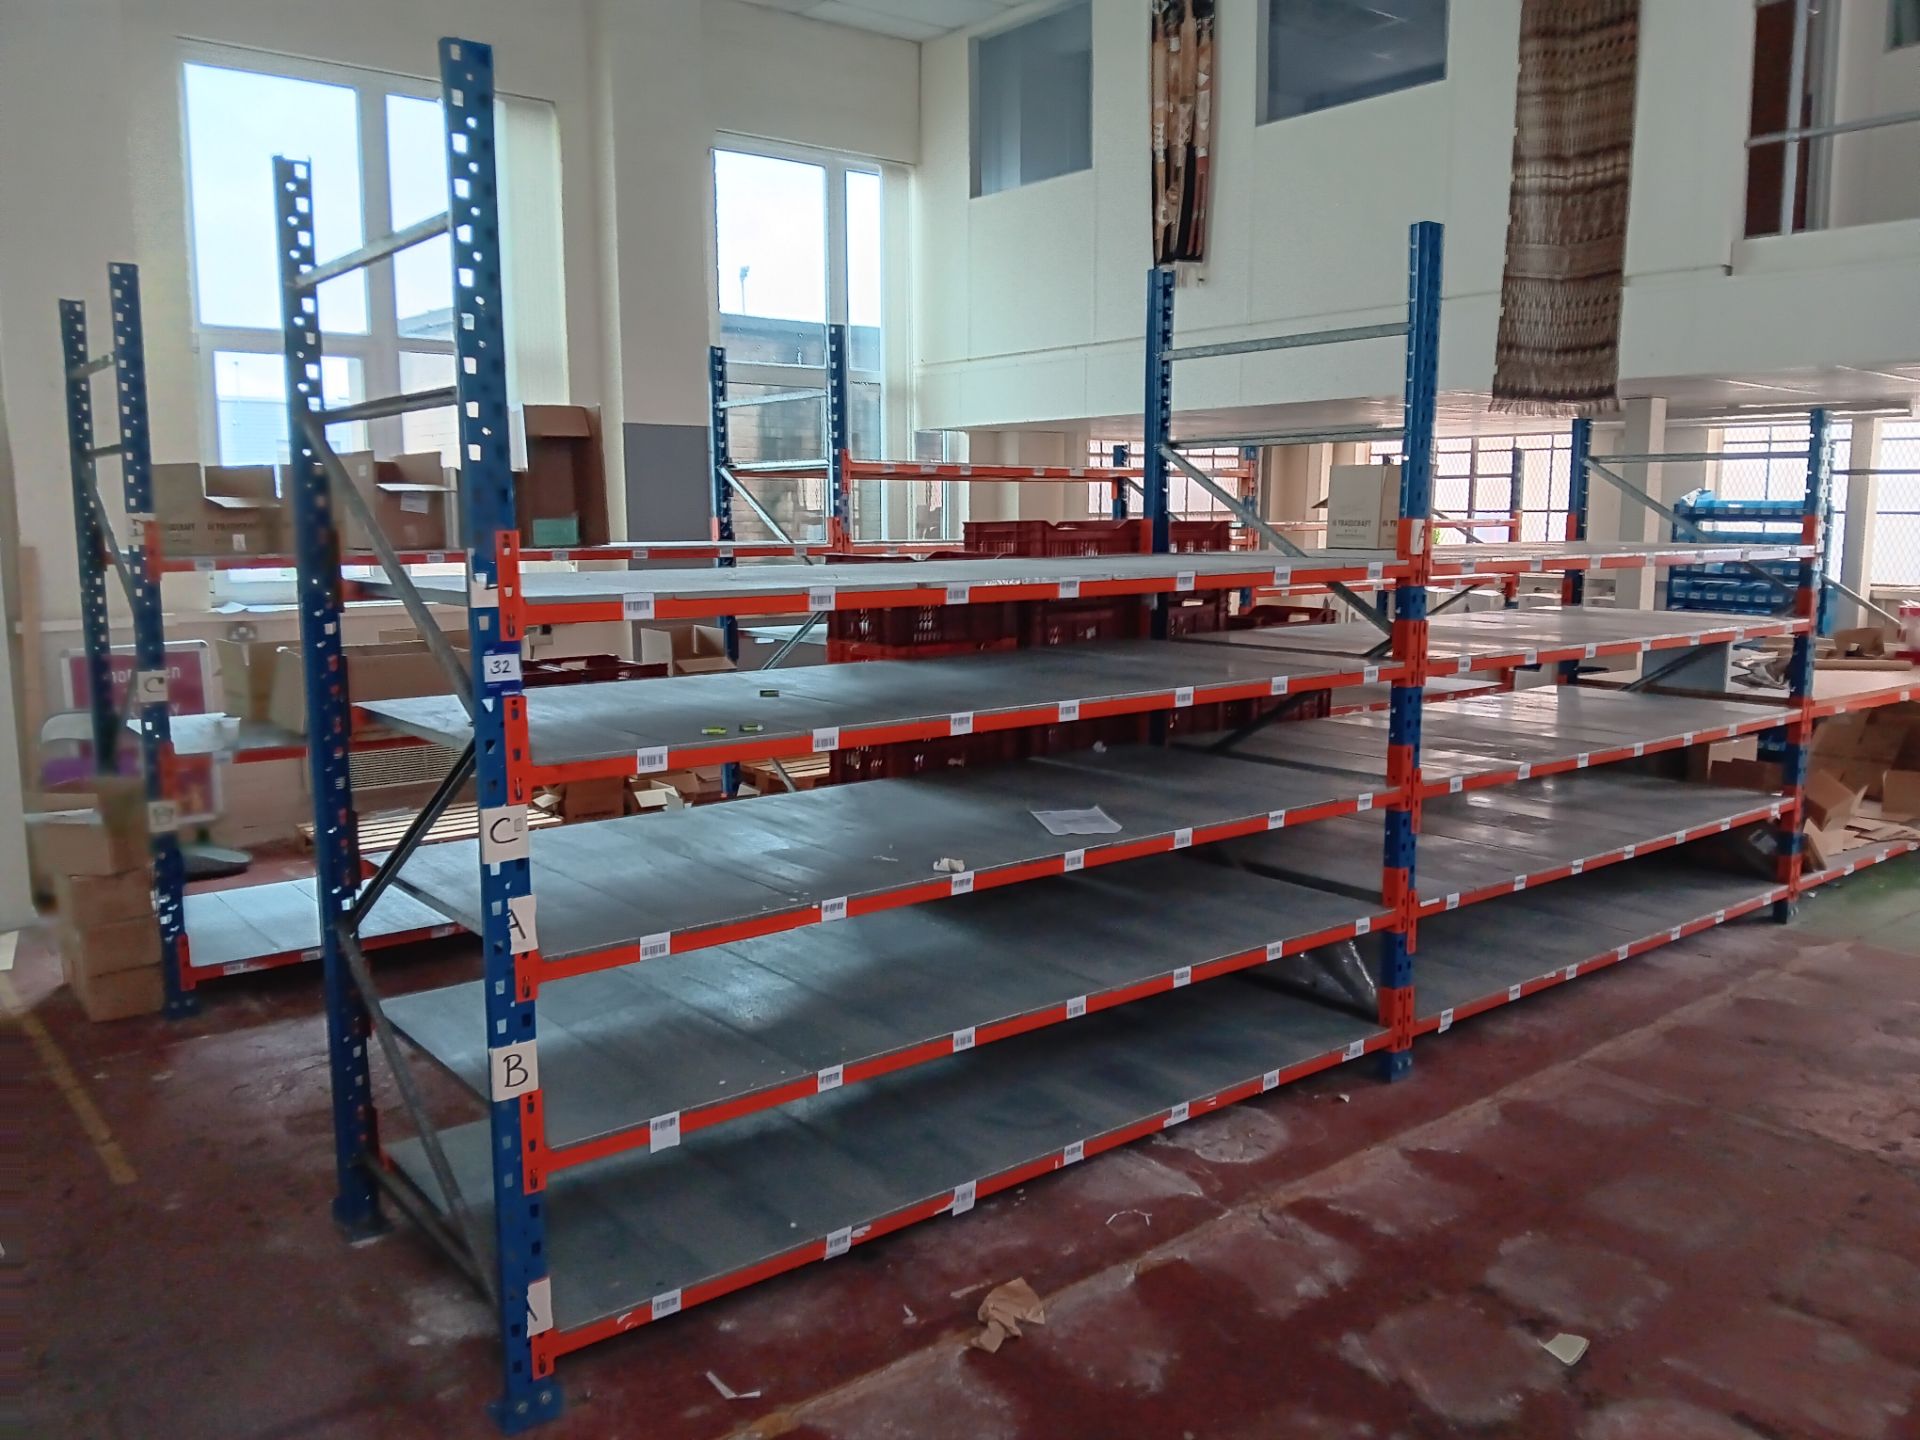 6 x Bays of Metal Racking Comprising of 8 x Uprights (Approx. 8ft 4” H) & 50 x Cross Beams (Buyer to